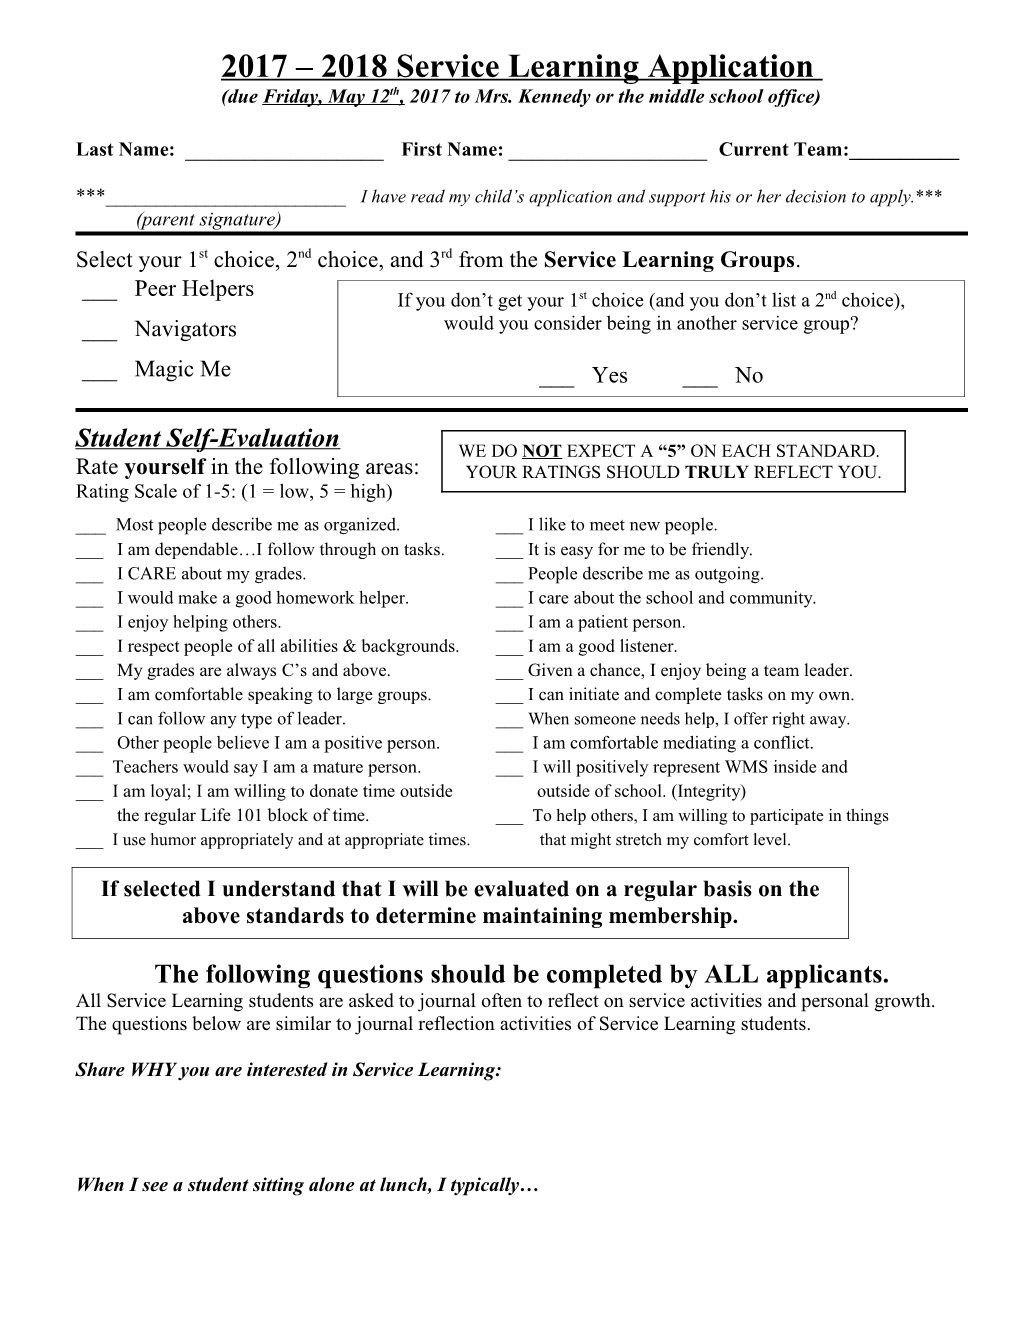 2011 2012 Service Learning Application